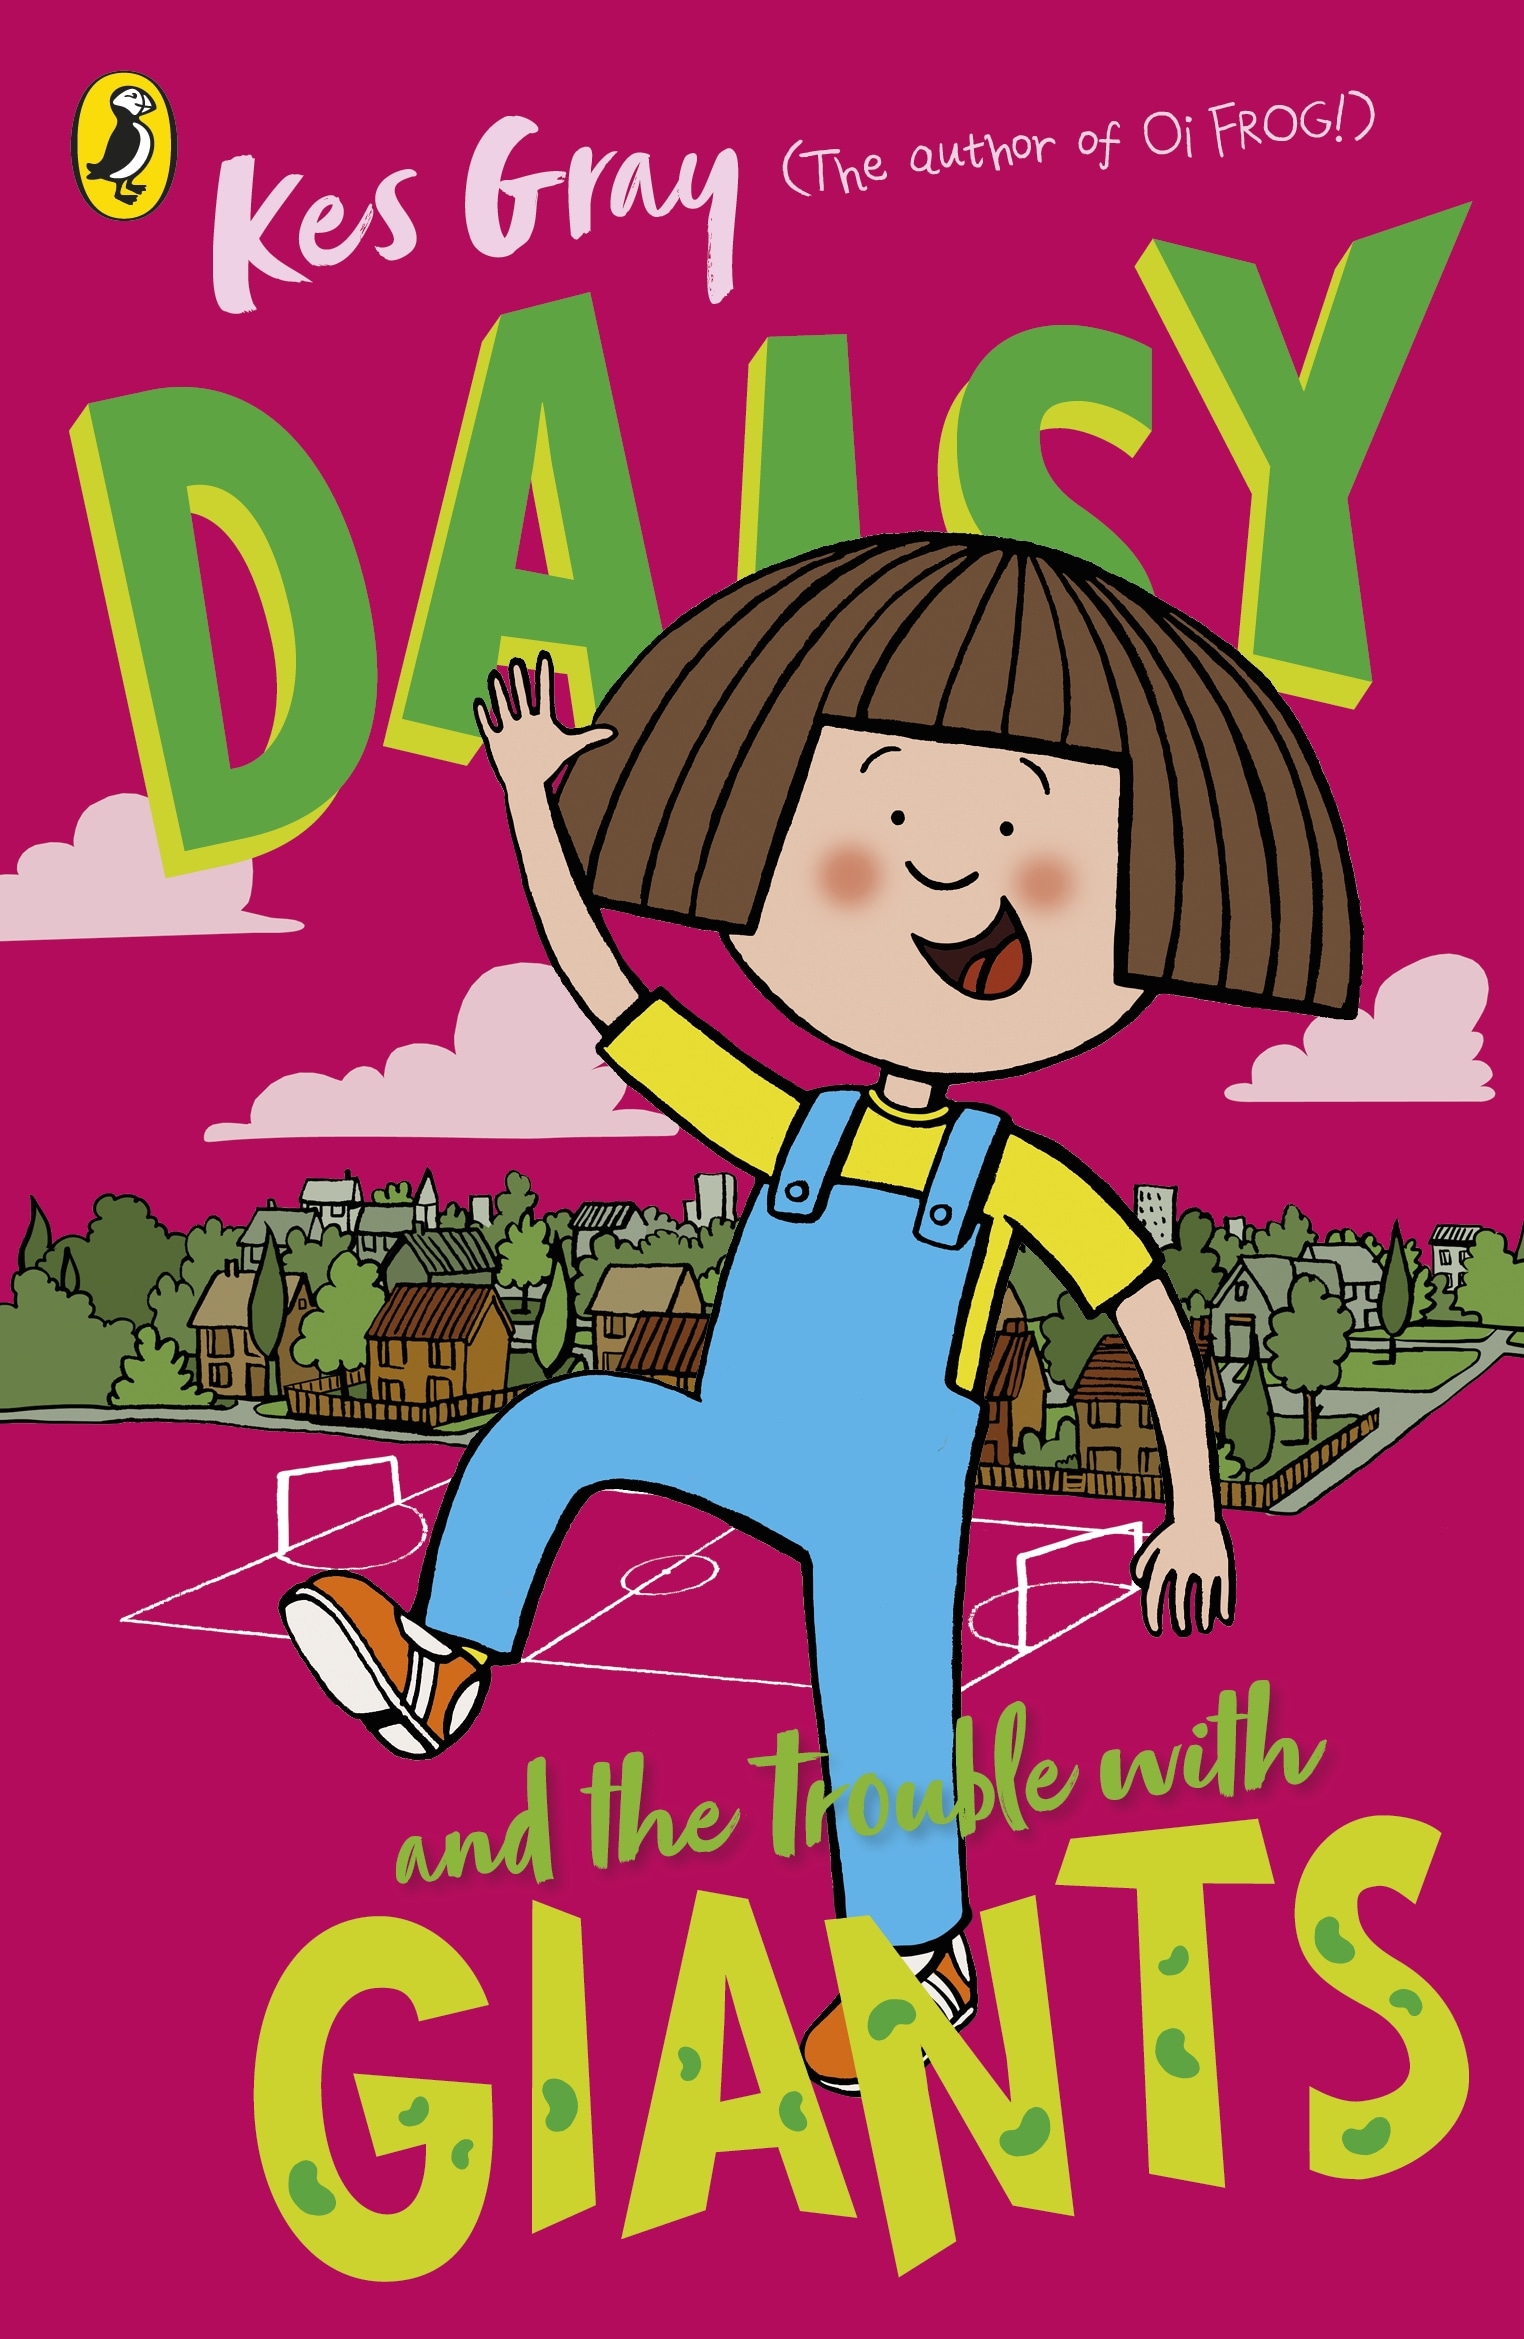 Book “Daisy and the Trouble with Giants” by Kes Gray — October 1, 2020